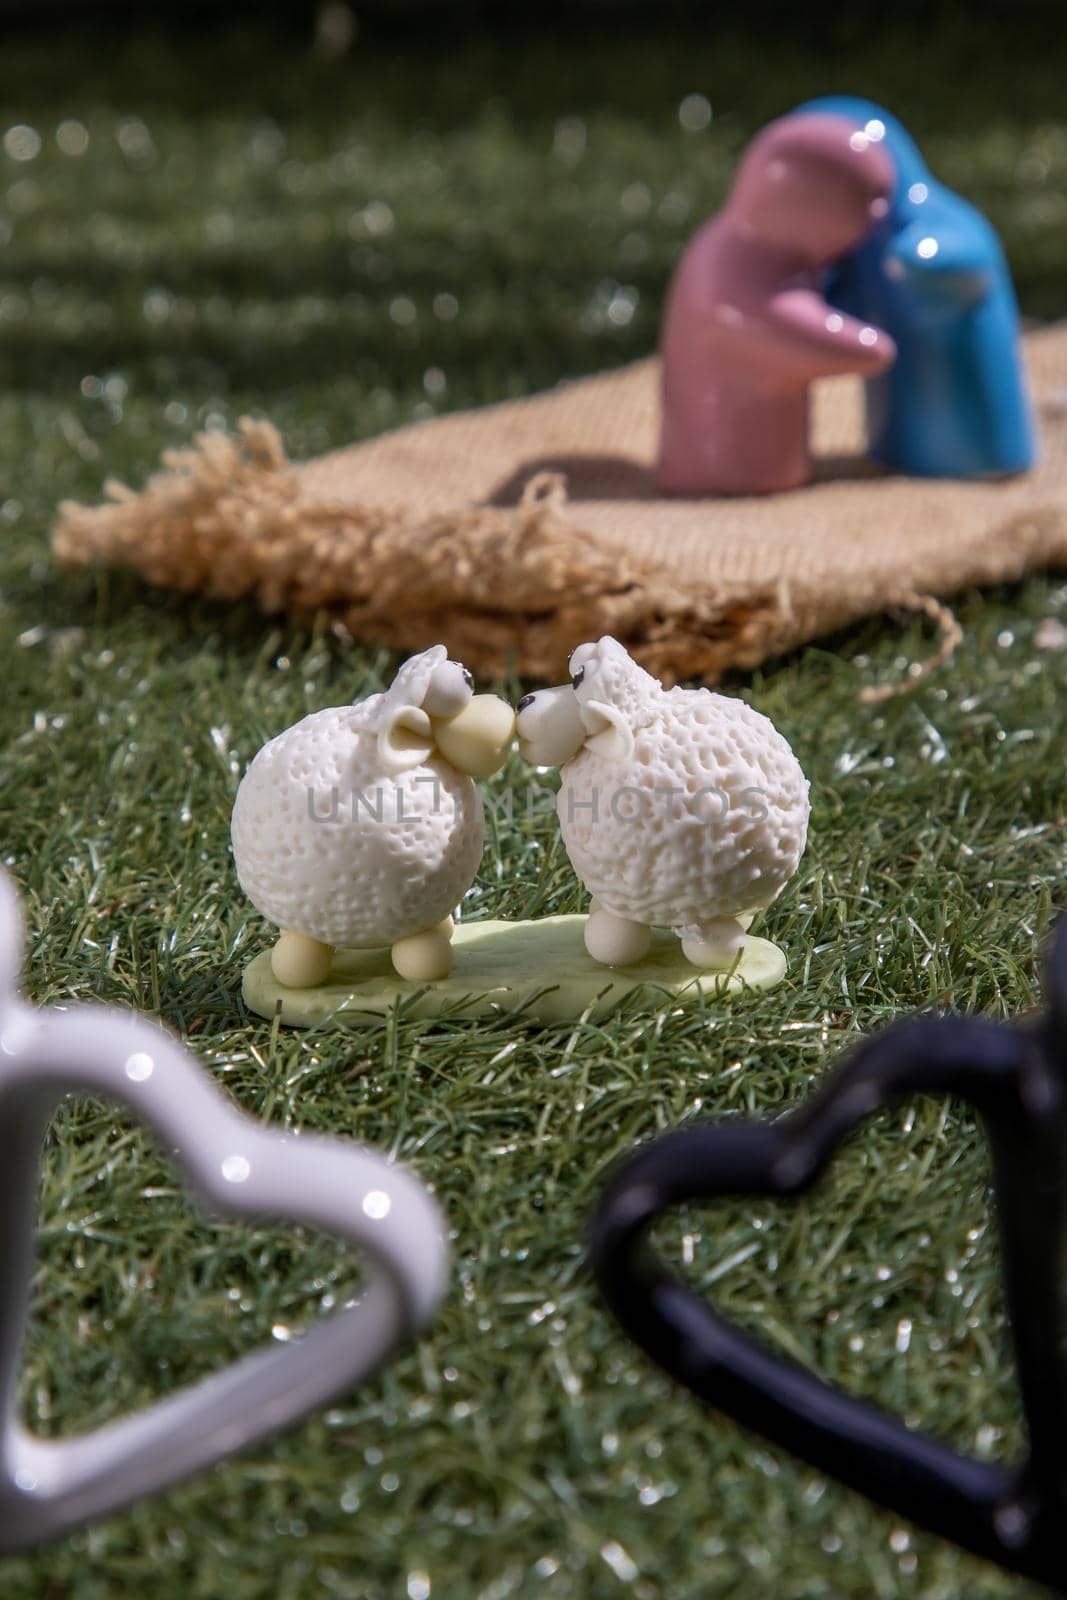 Ceramic couple dolls hug and Sheep ceramic couple dolls Kissing on lawn. Love concept. by tosirikul